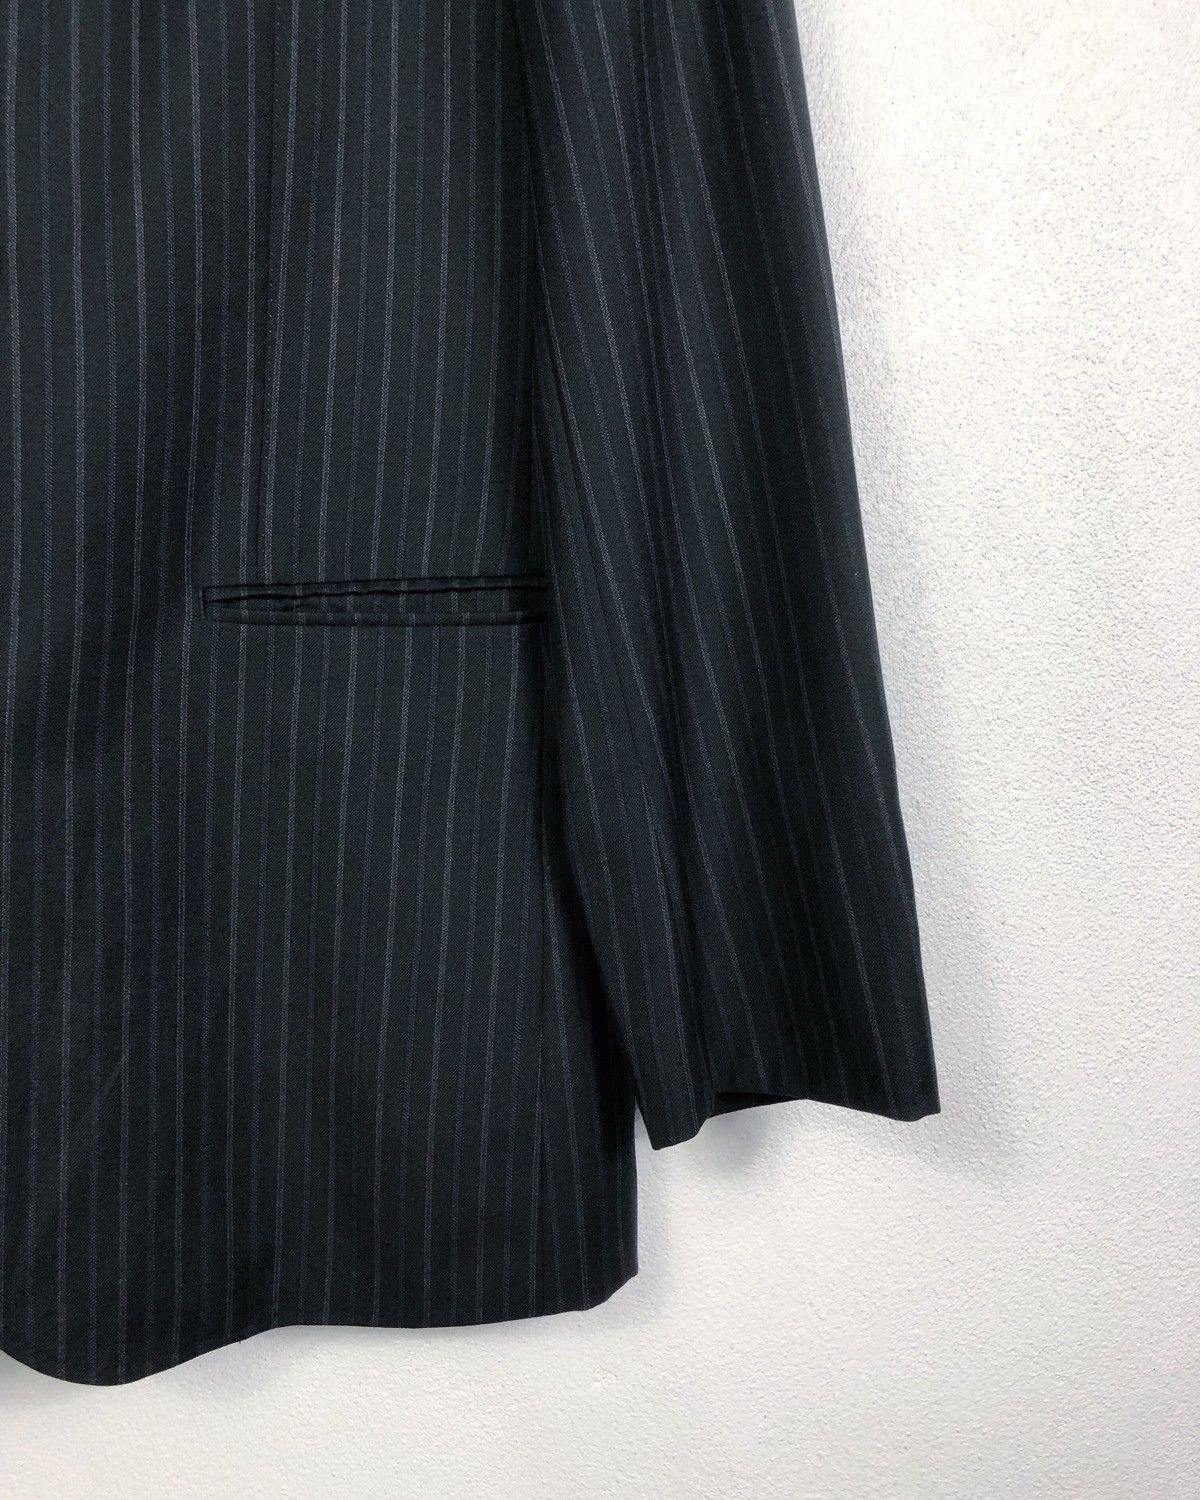 Paul Smith Rare Paul Smith London Blazer Suit Made in Italy Size US L / EU 52-54 / 3 - 5 Thumbnail